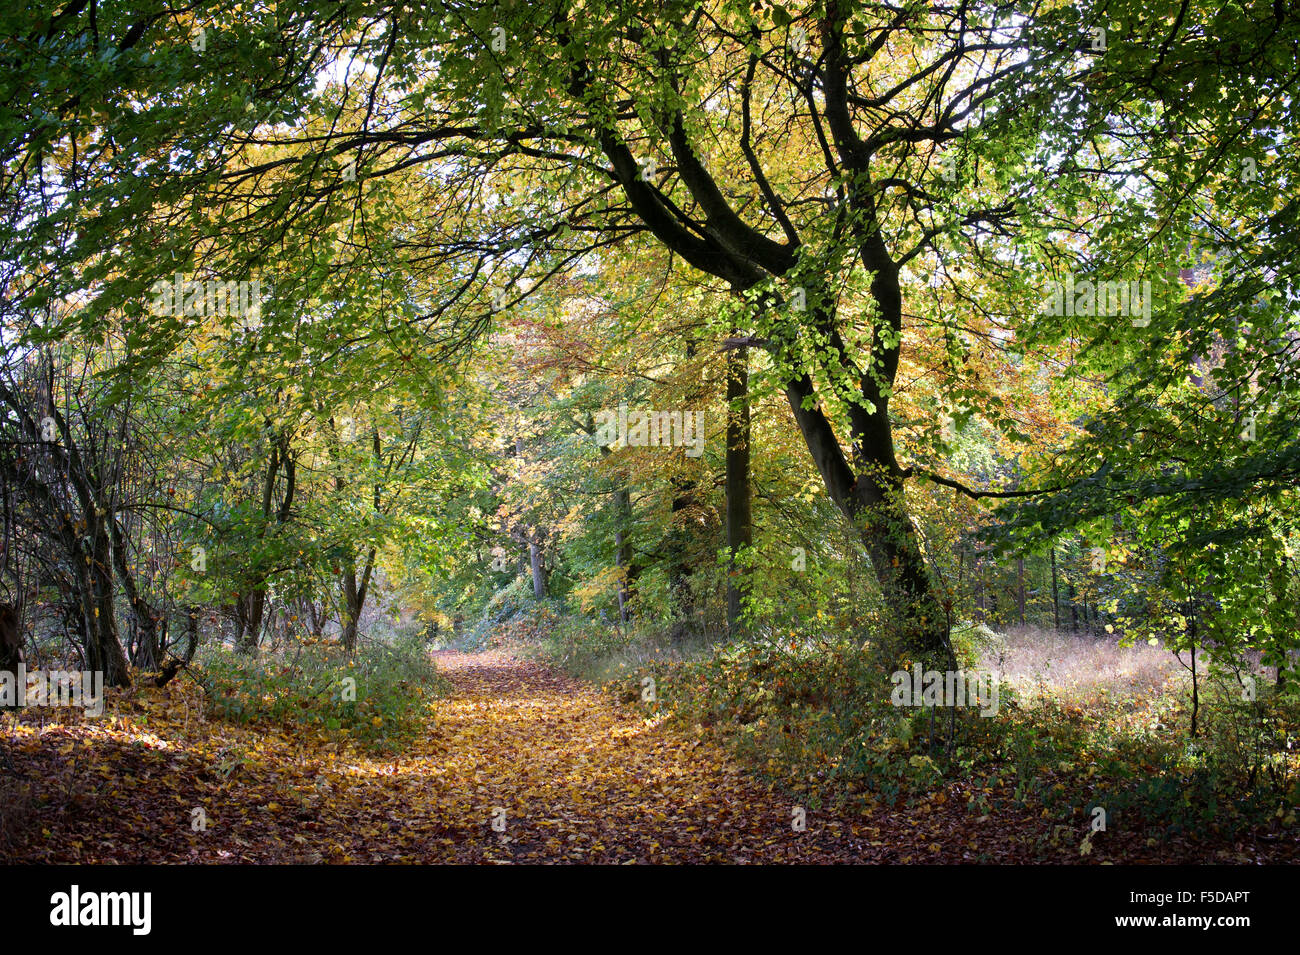 Pathway through Beech trees in an English woodland in autumn Stock Photo